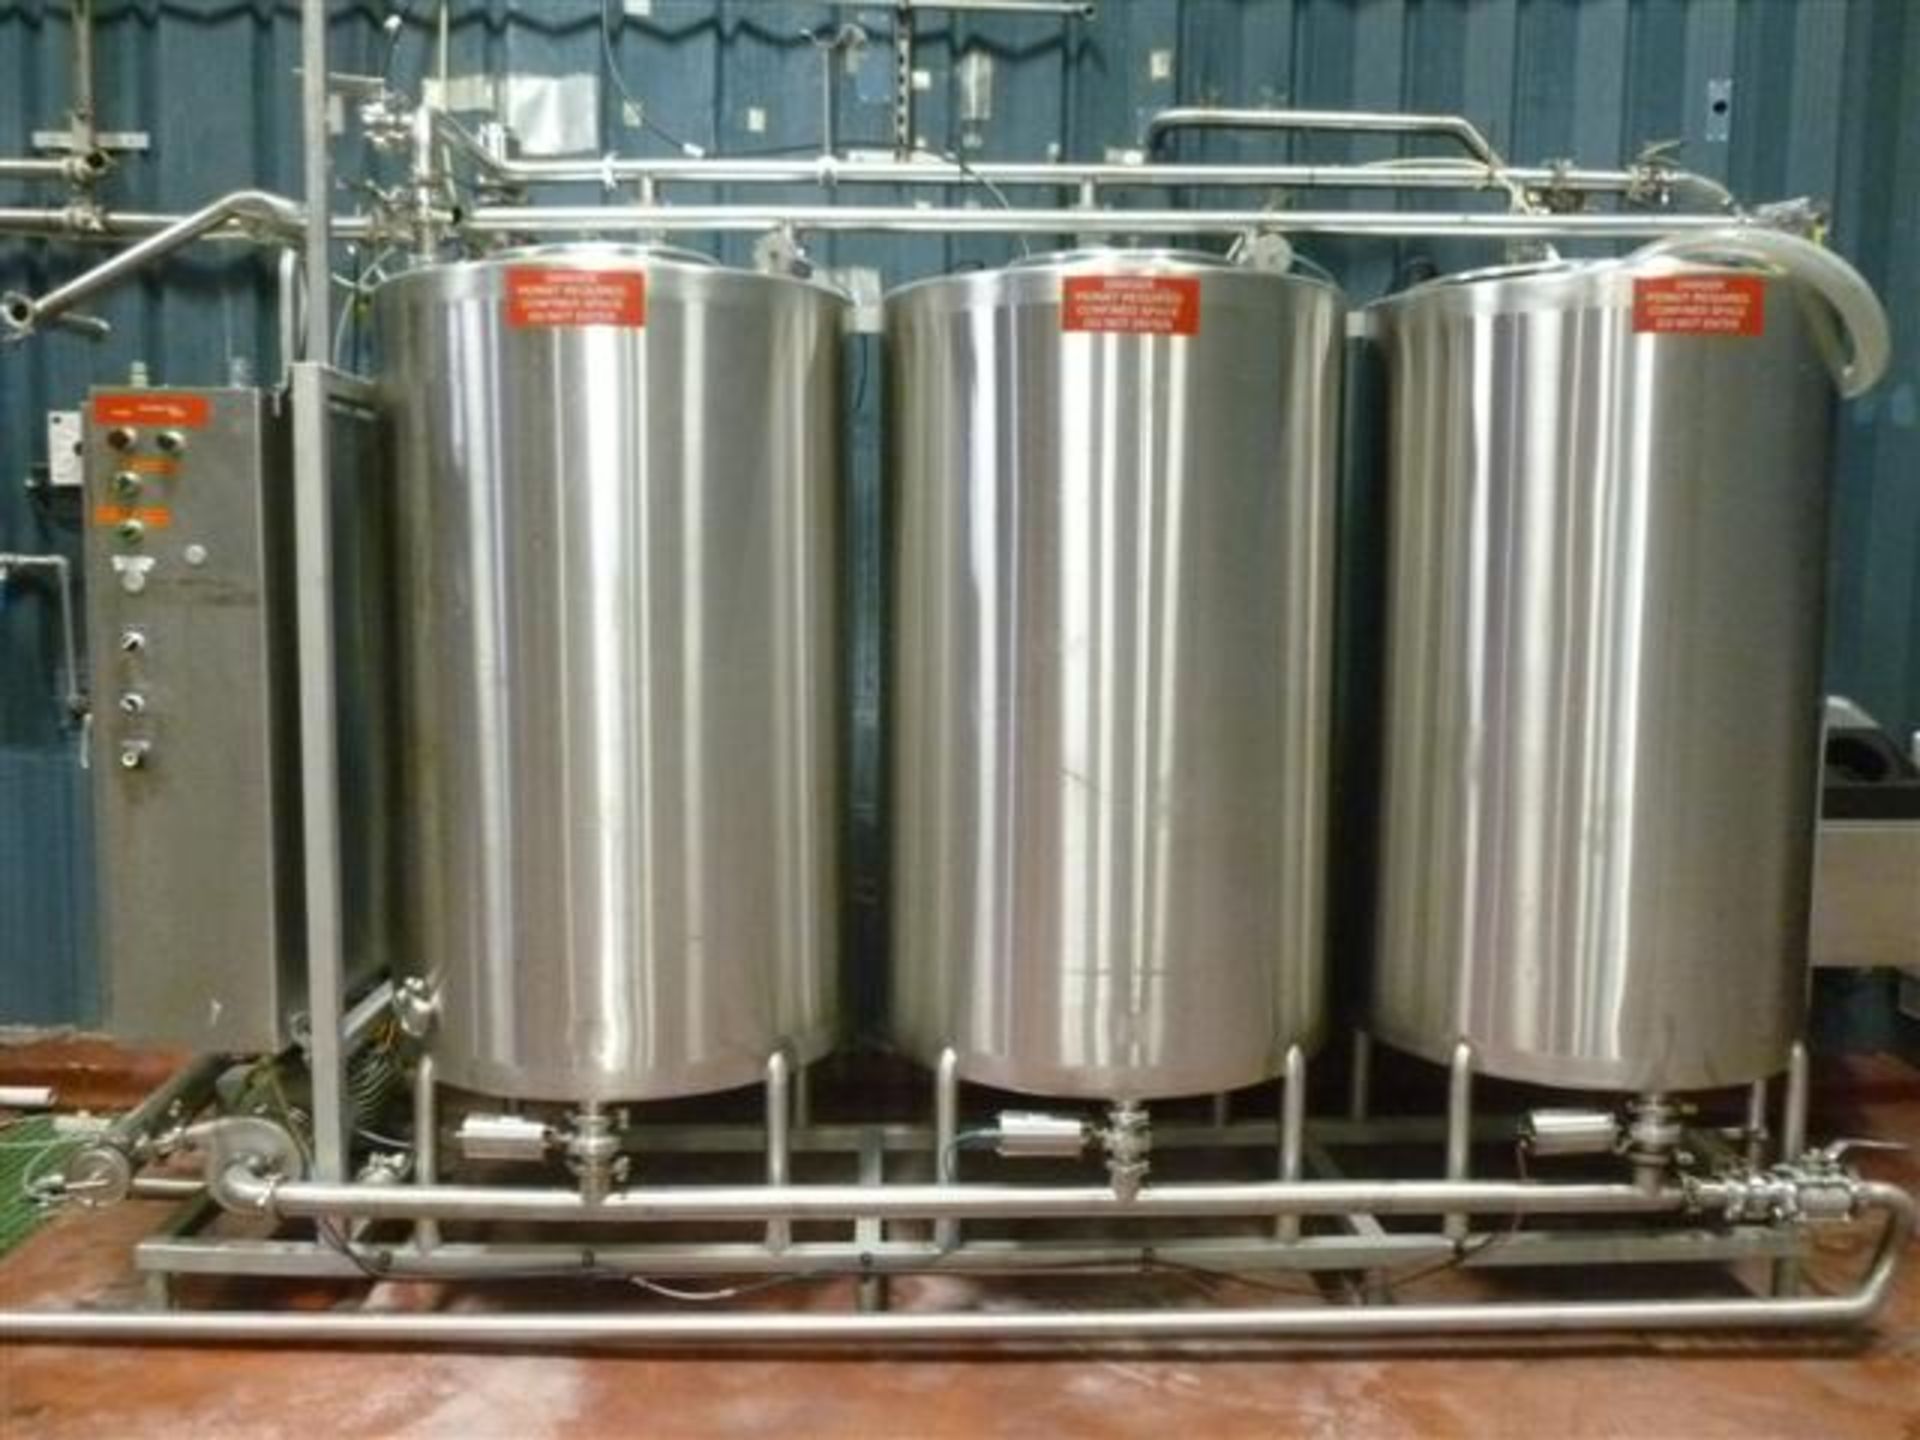 Sani-Matic 3 Tank CIP System Serial: 5288 Estimated 300 Gallon Each Tank with Tri-Clover Pump, S/T - Image 2 of 3